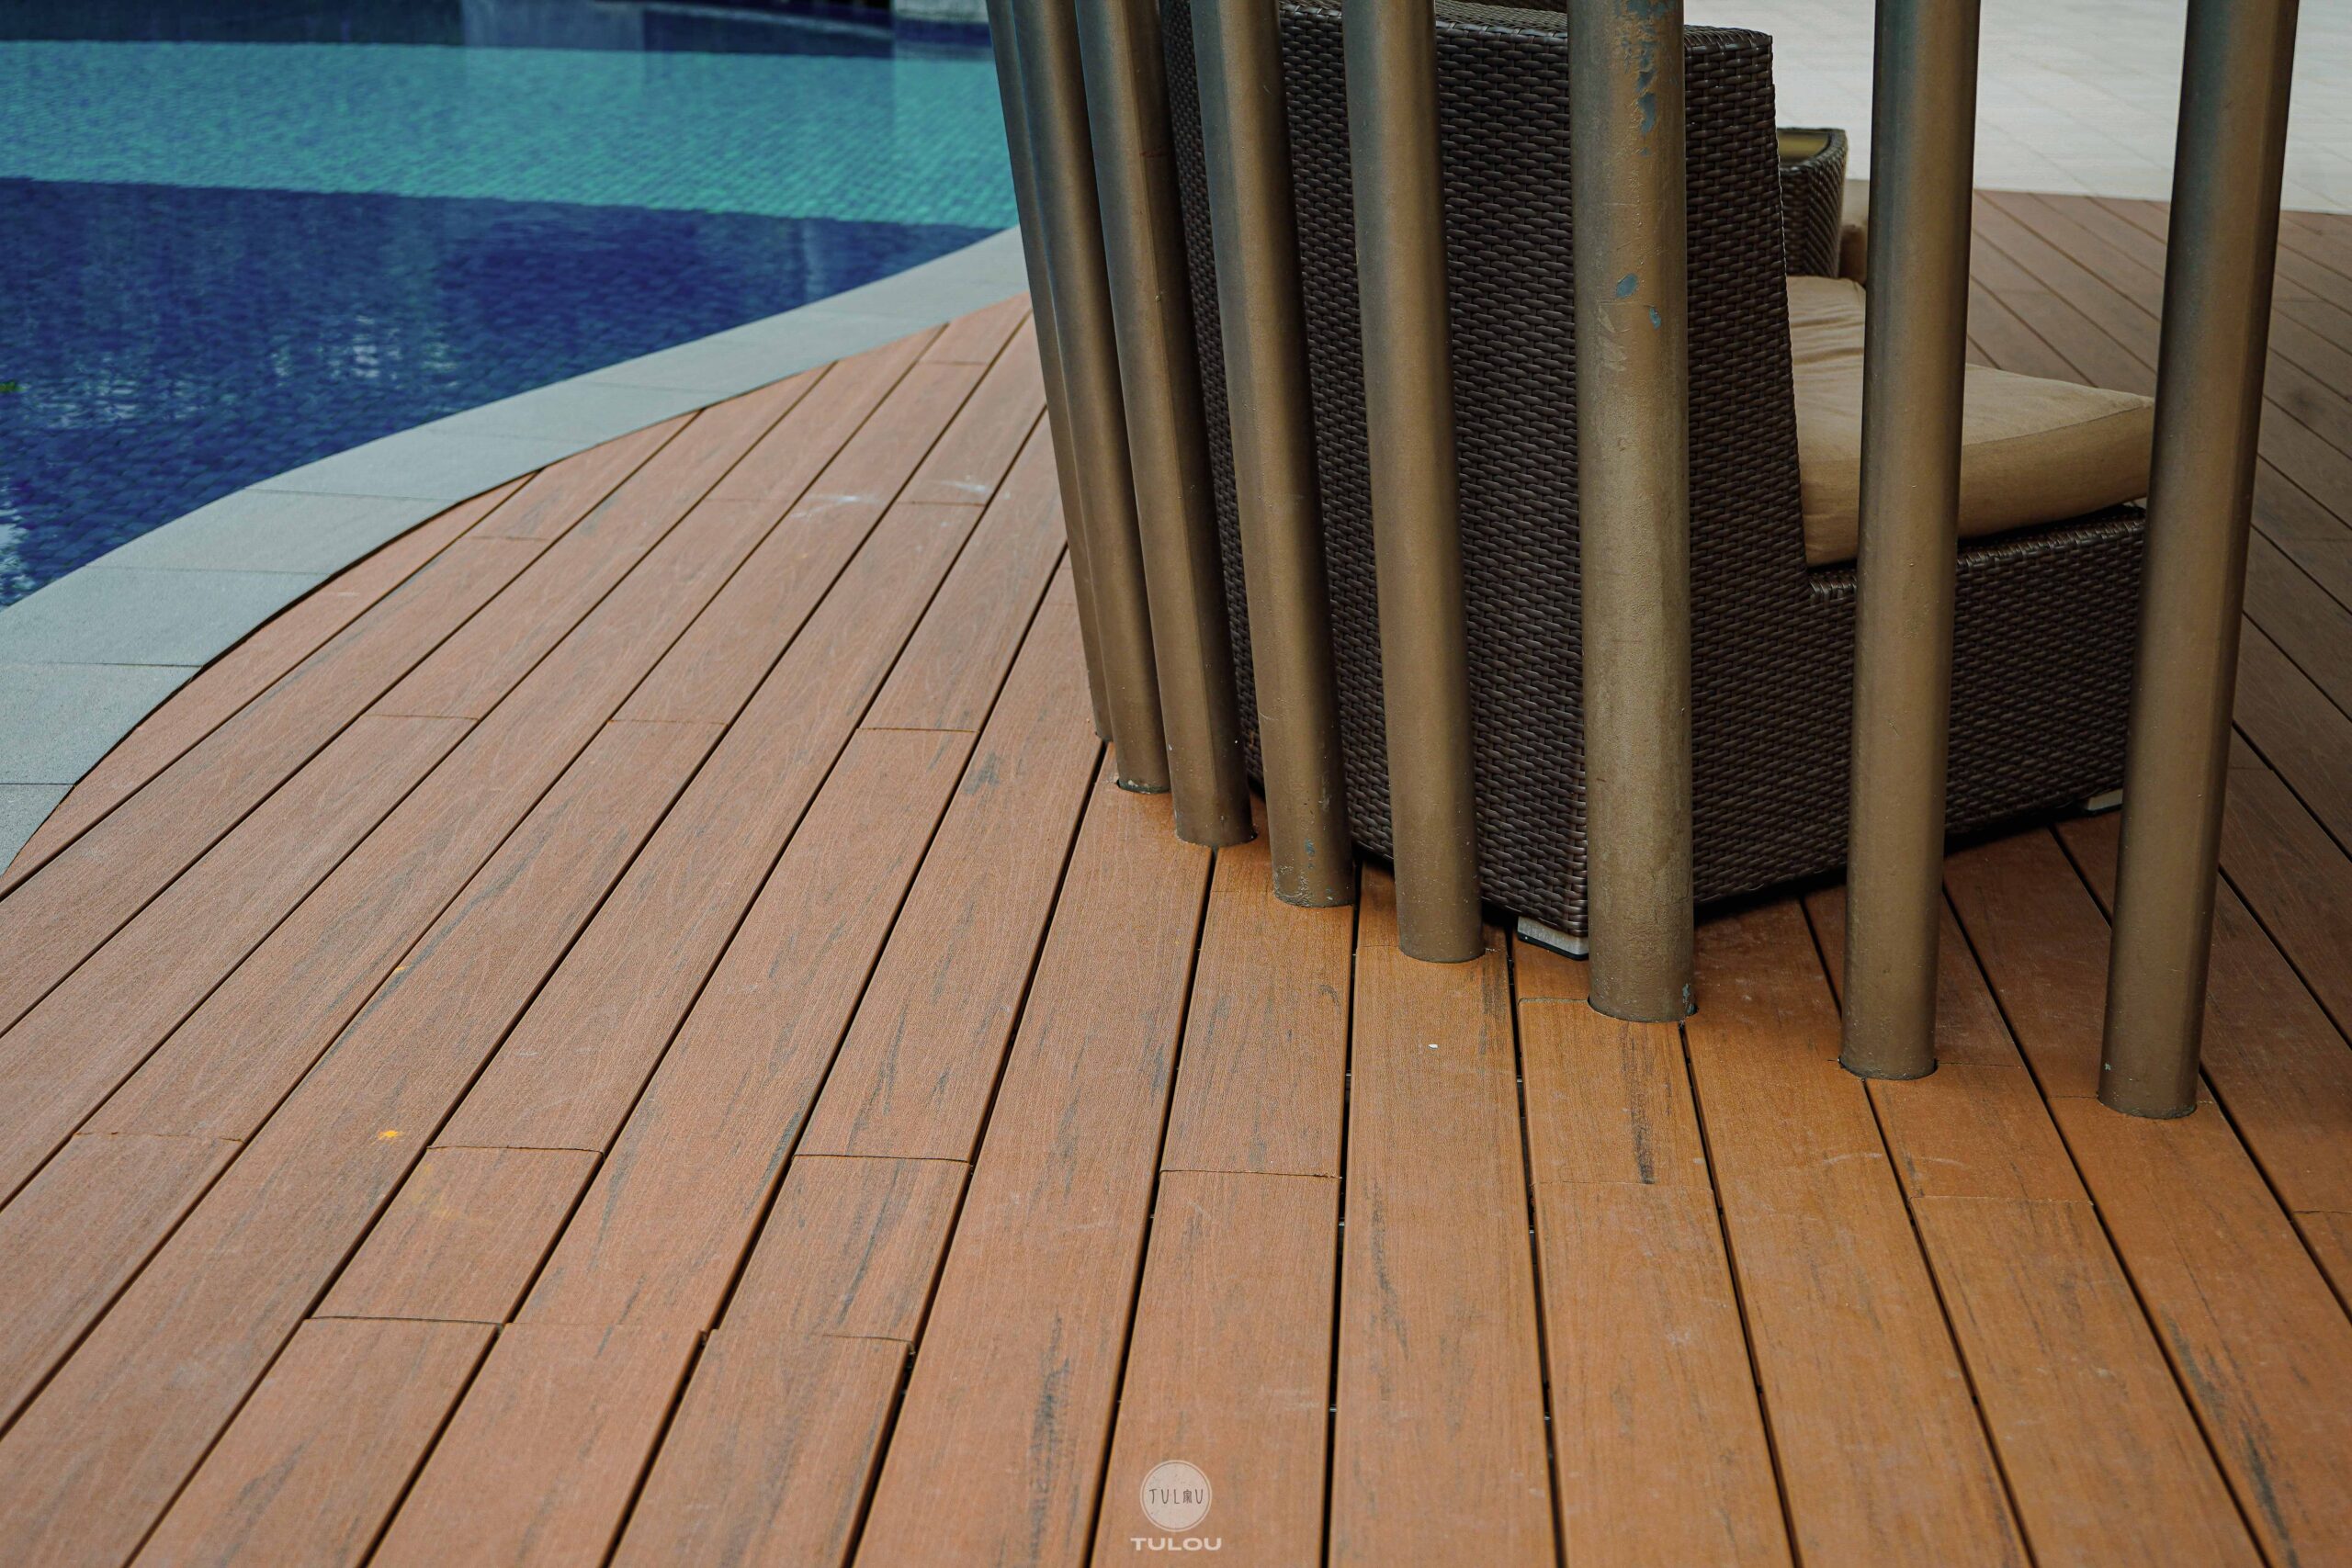 Tulou Composite Timber Decking Singapore Tampines Trilliant 2 scaled - The Tampines Trilliant